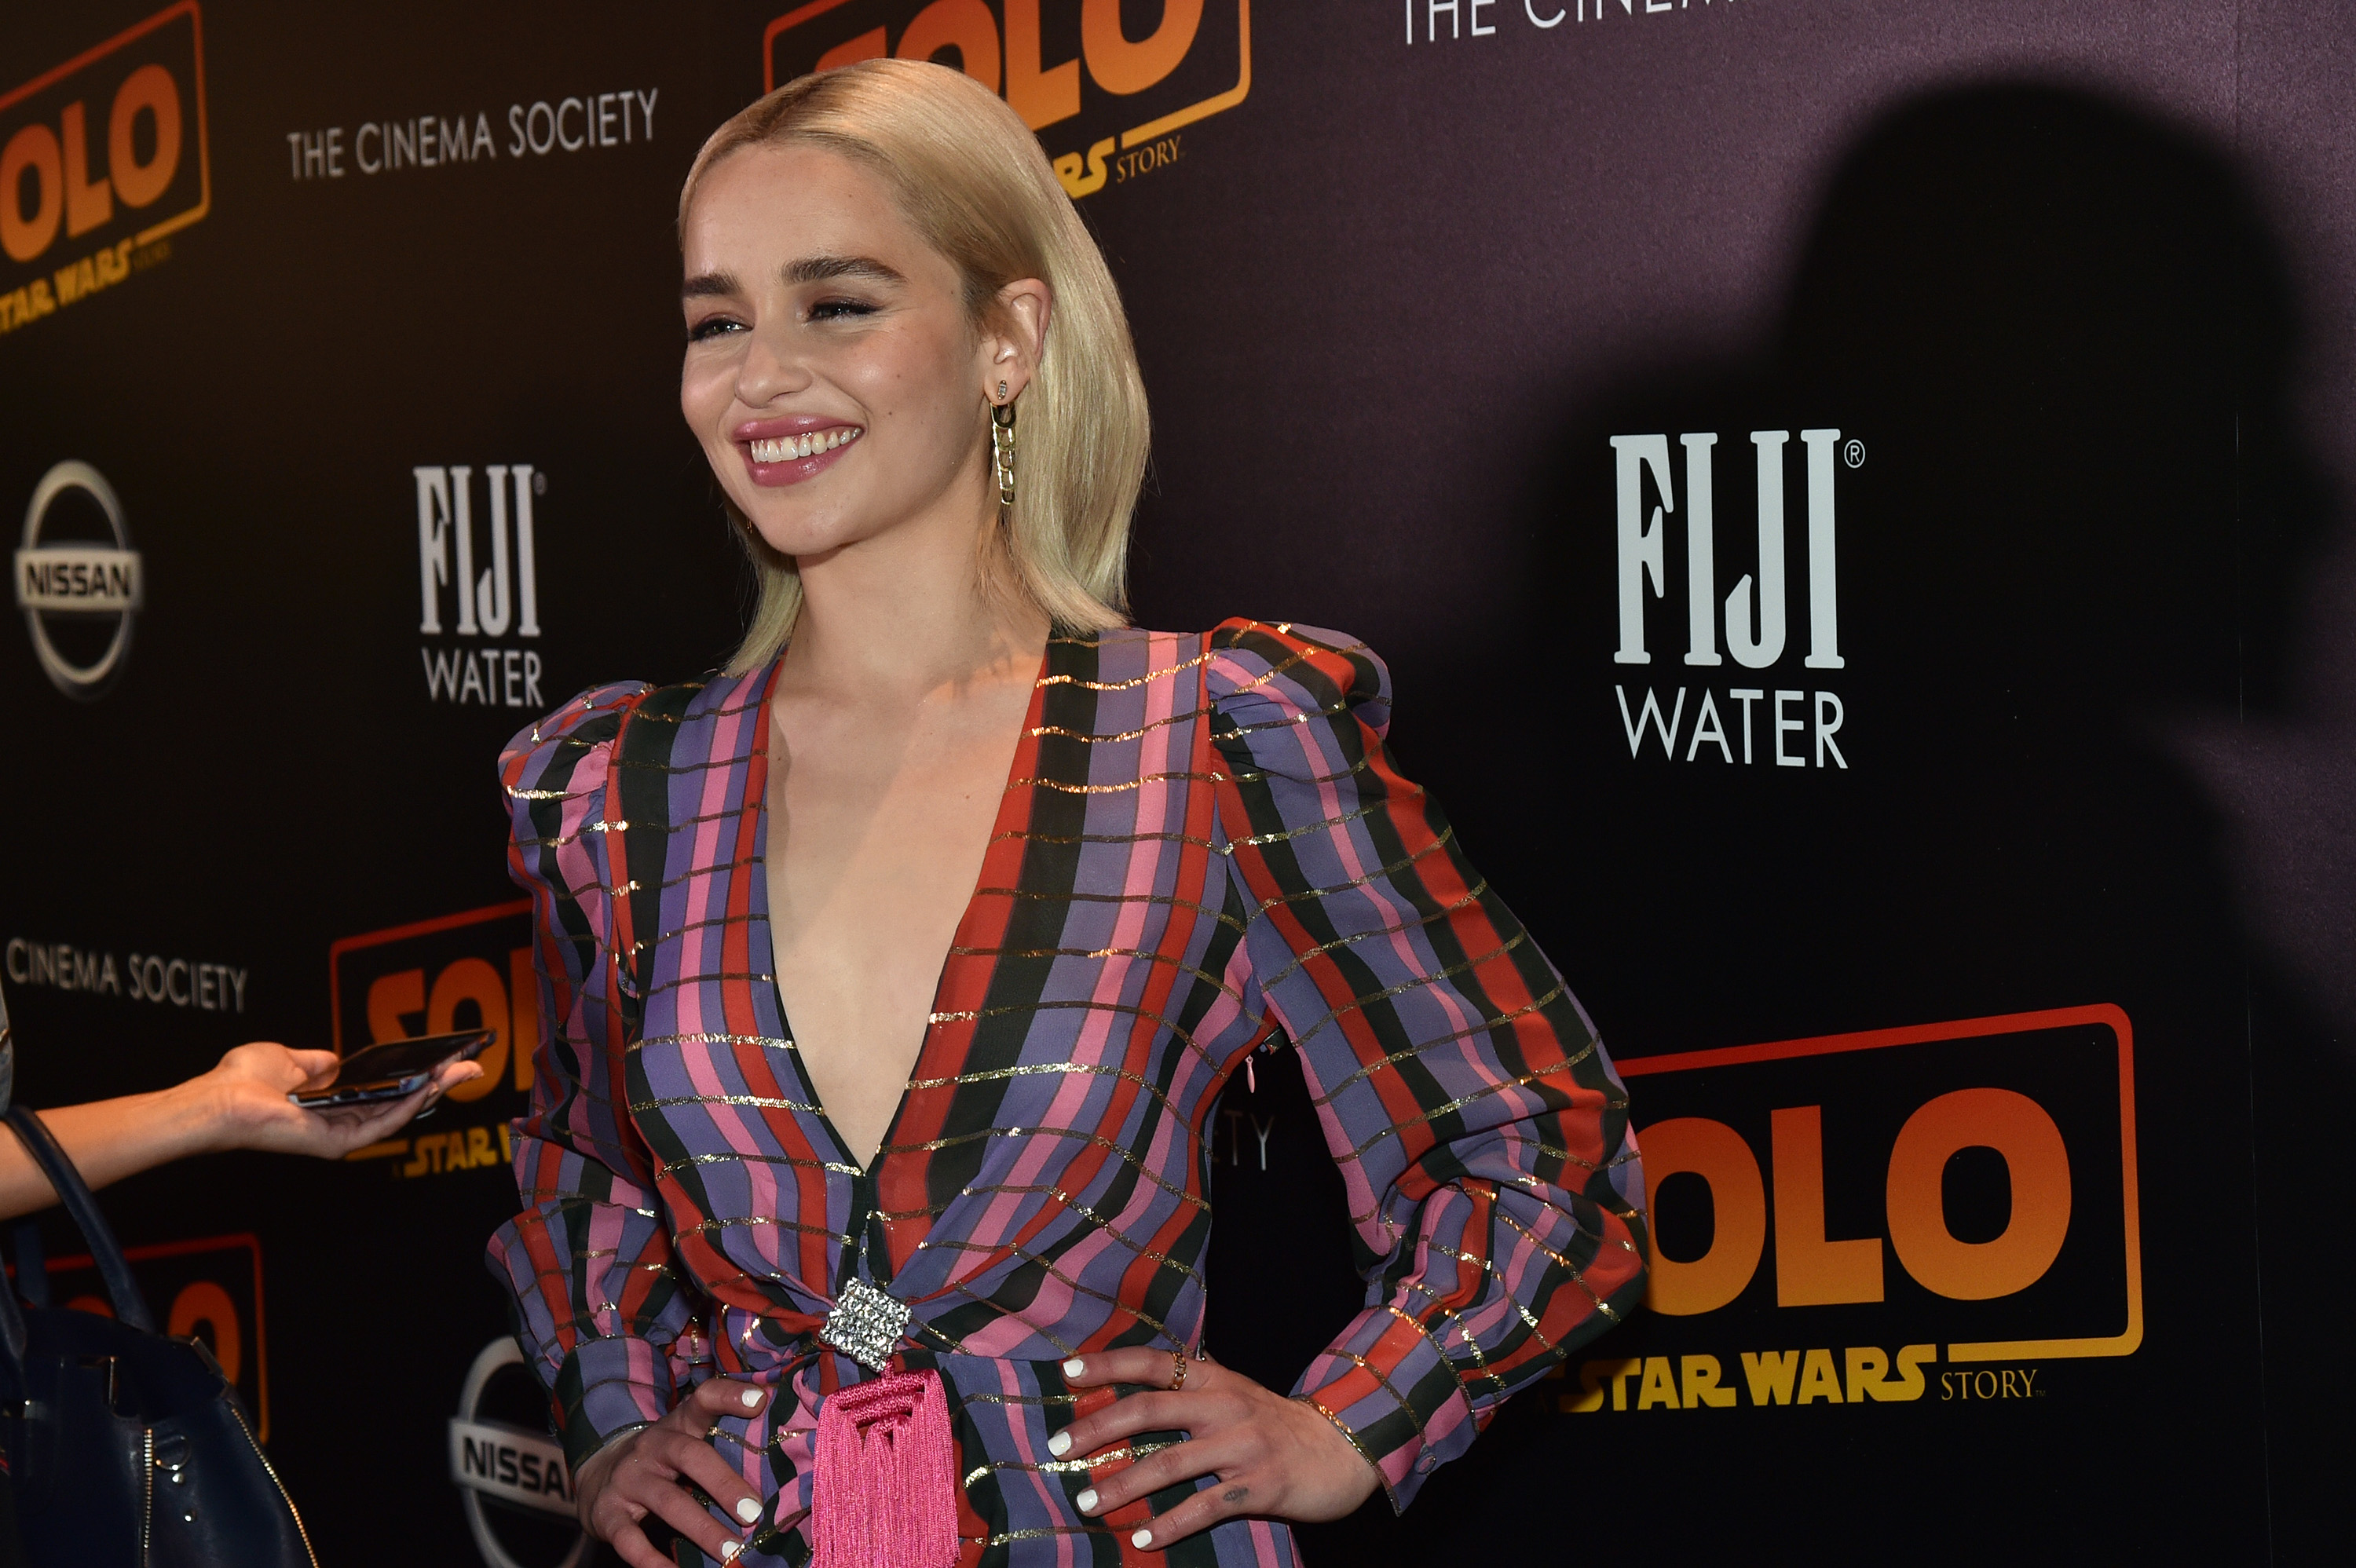 'Solo' star Emilia Clarke wearing a pink, purple, and red dress and standing in front of a 'Solo' and FIJI wall